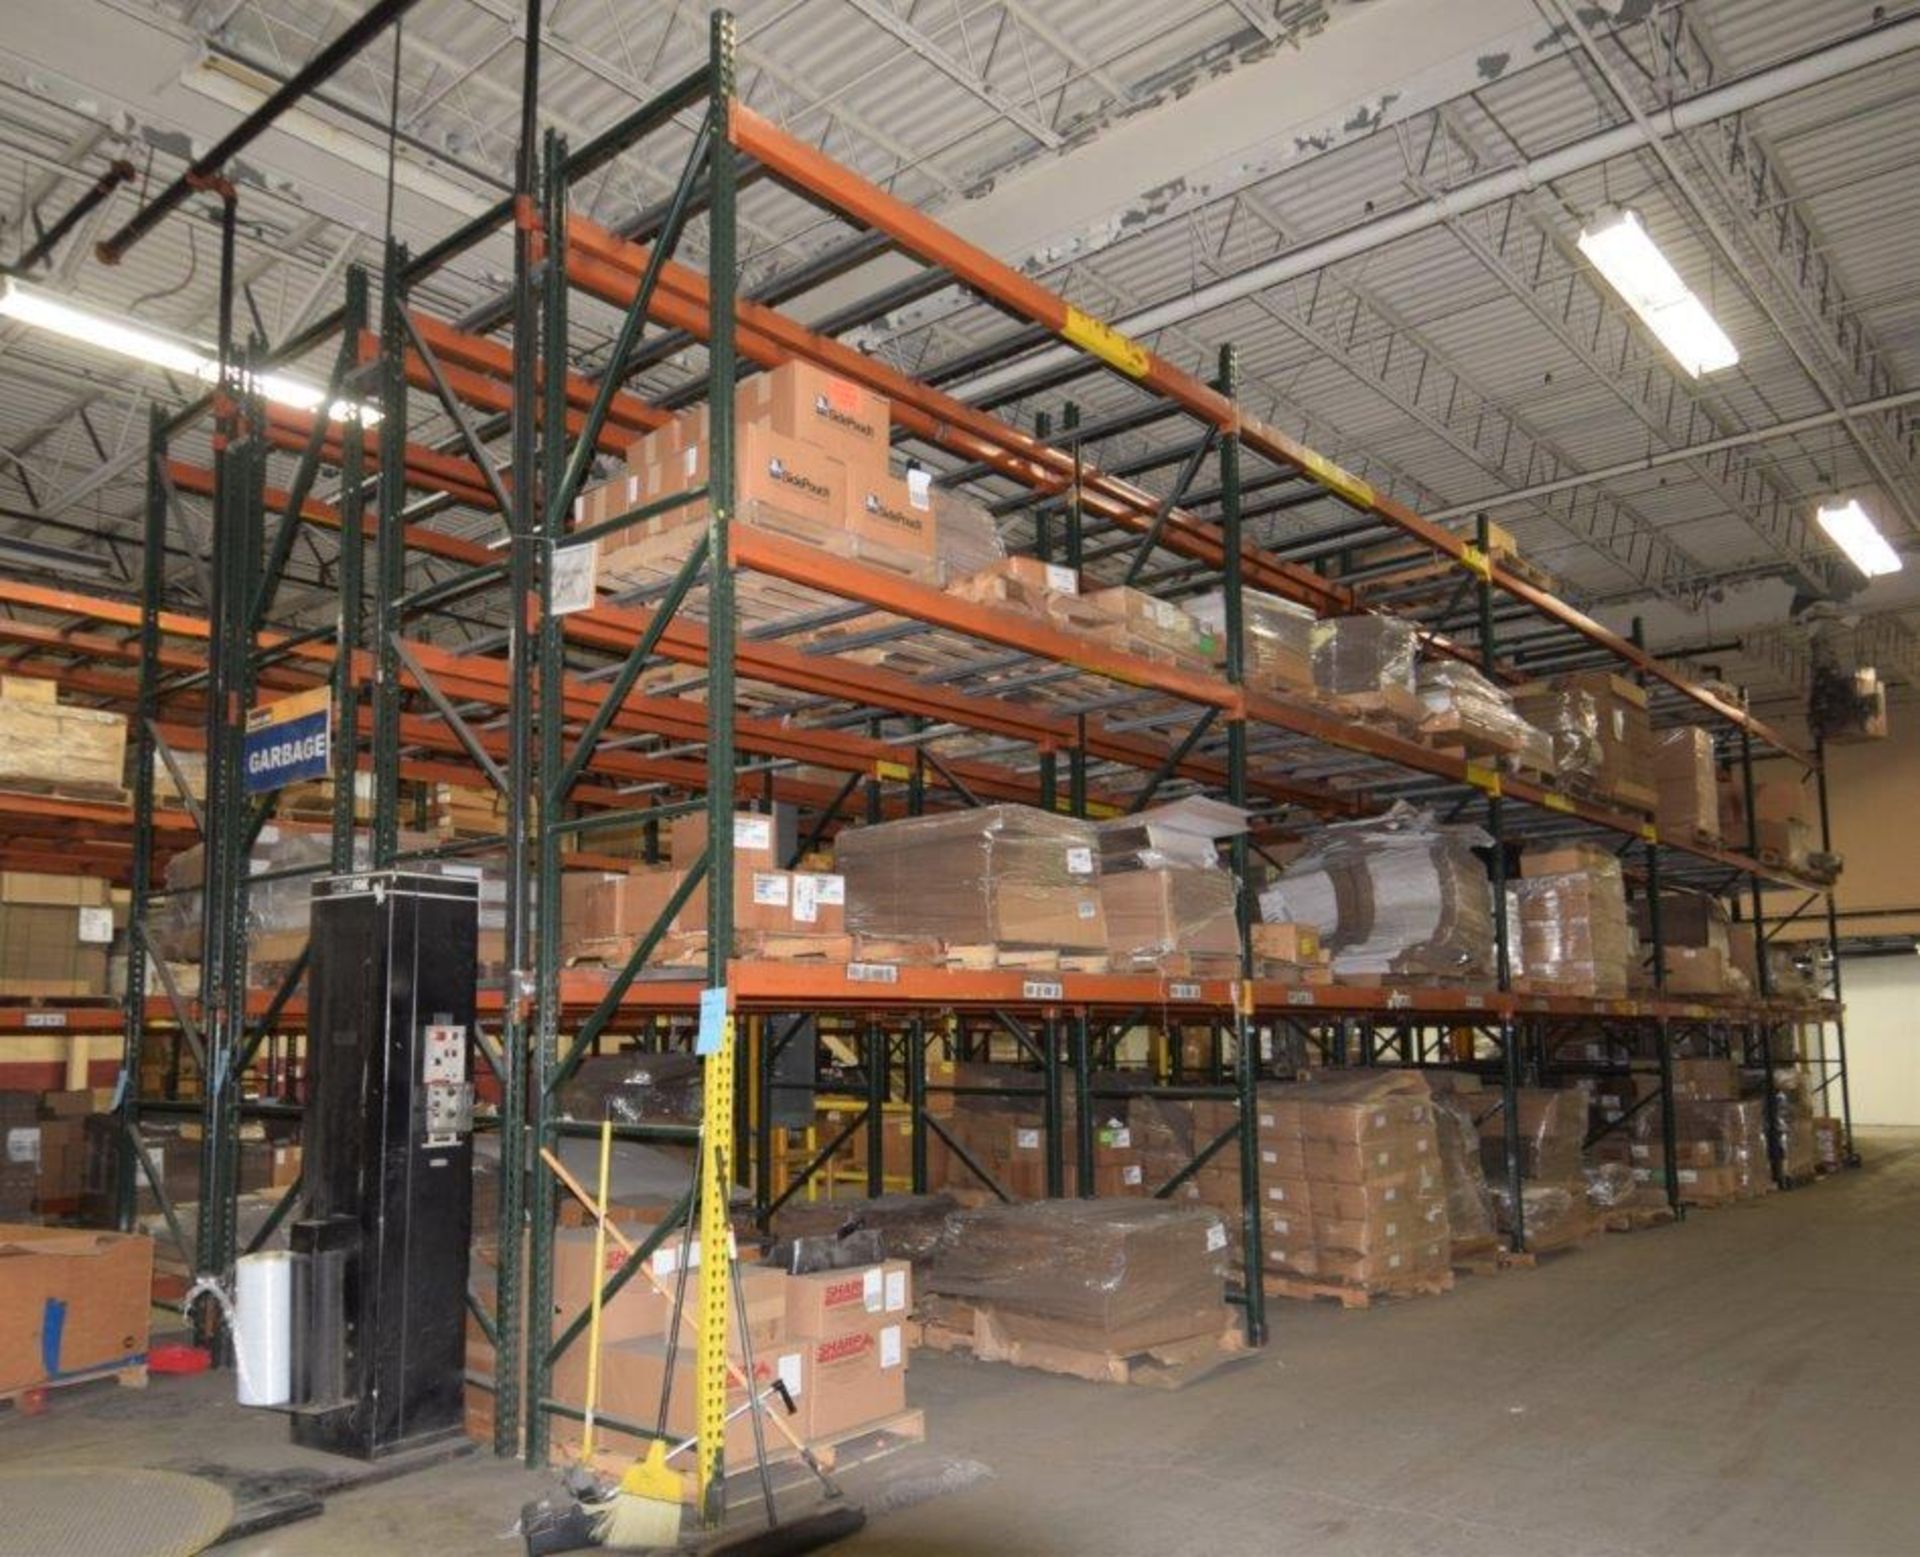 Lot Of 42" Deep Teardrop Pallet Racking Consisting Of: (24) 17' tall uprights, (132) 136" wide cross